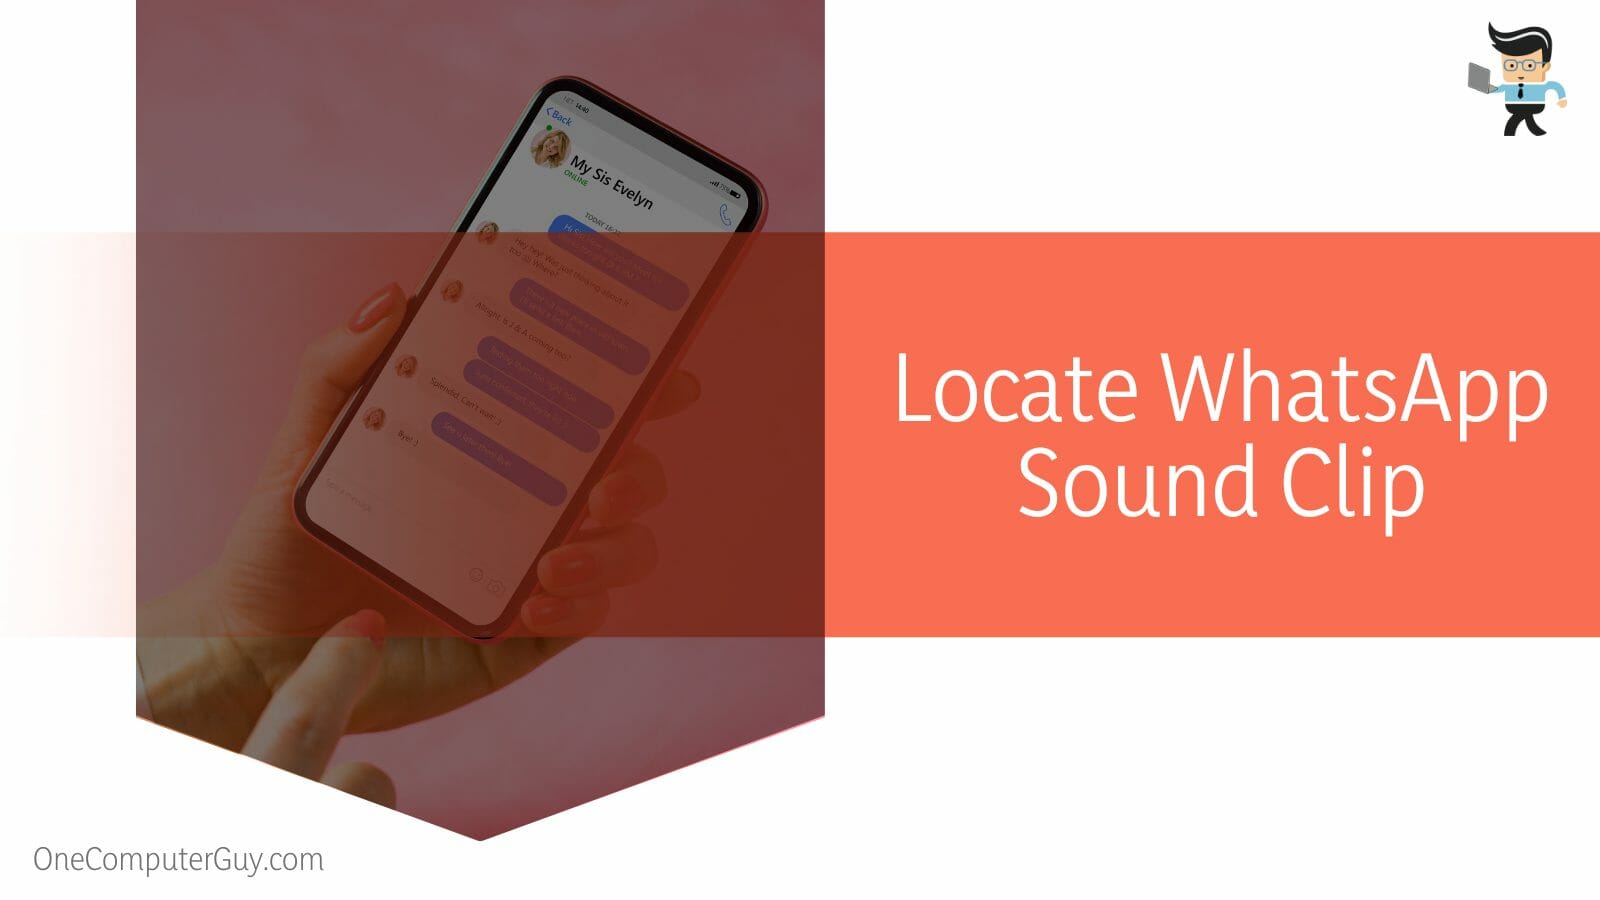 Locate WhatsApp Sound Clip on Your iPhone